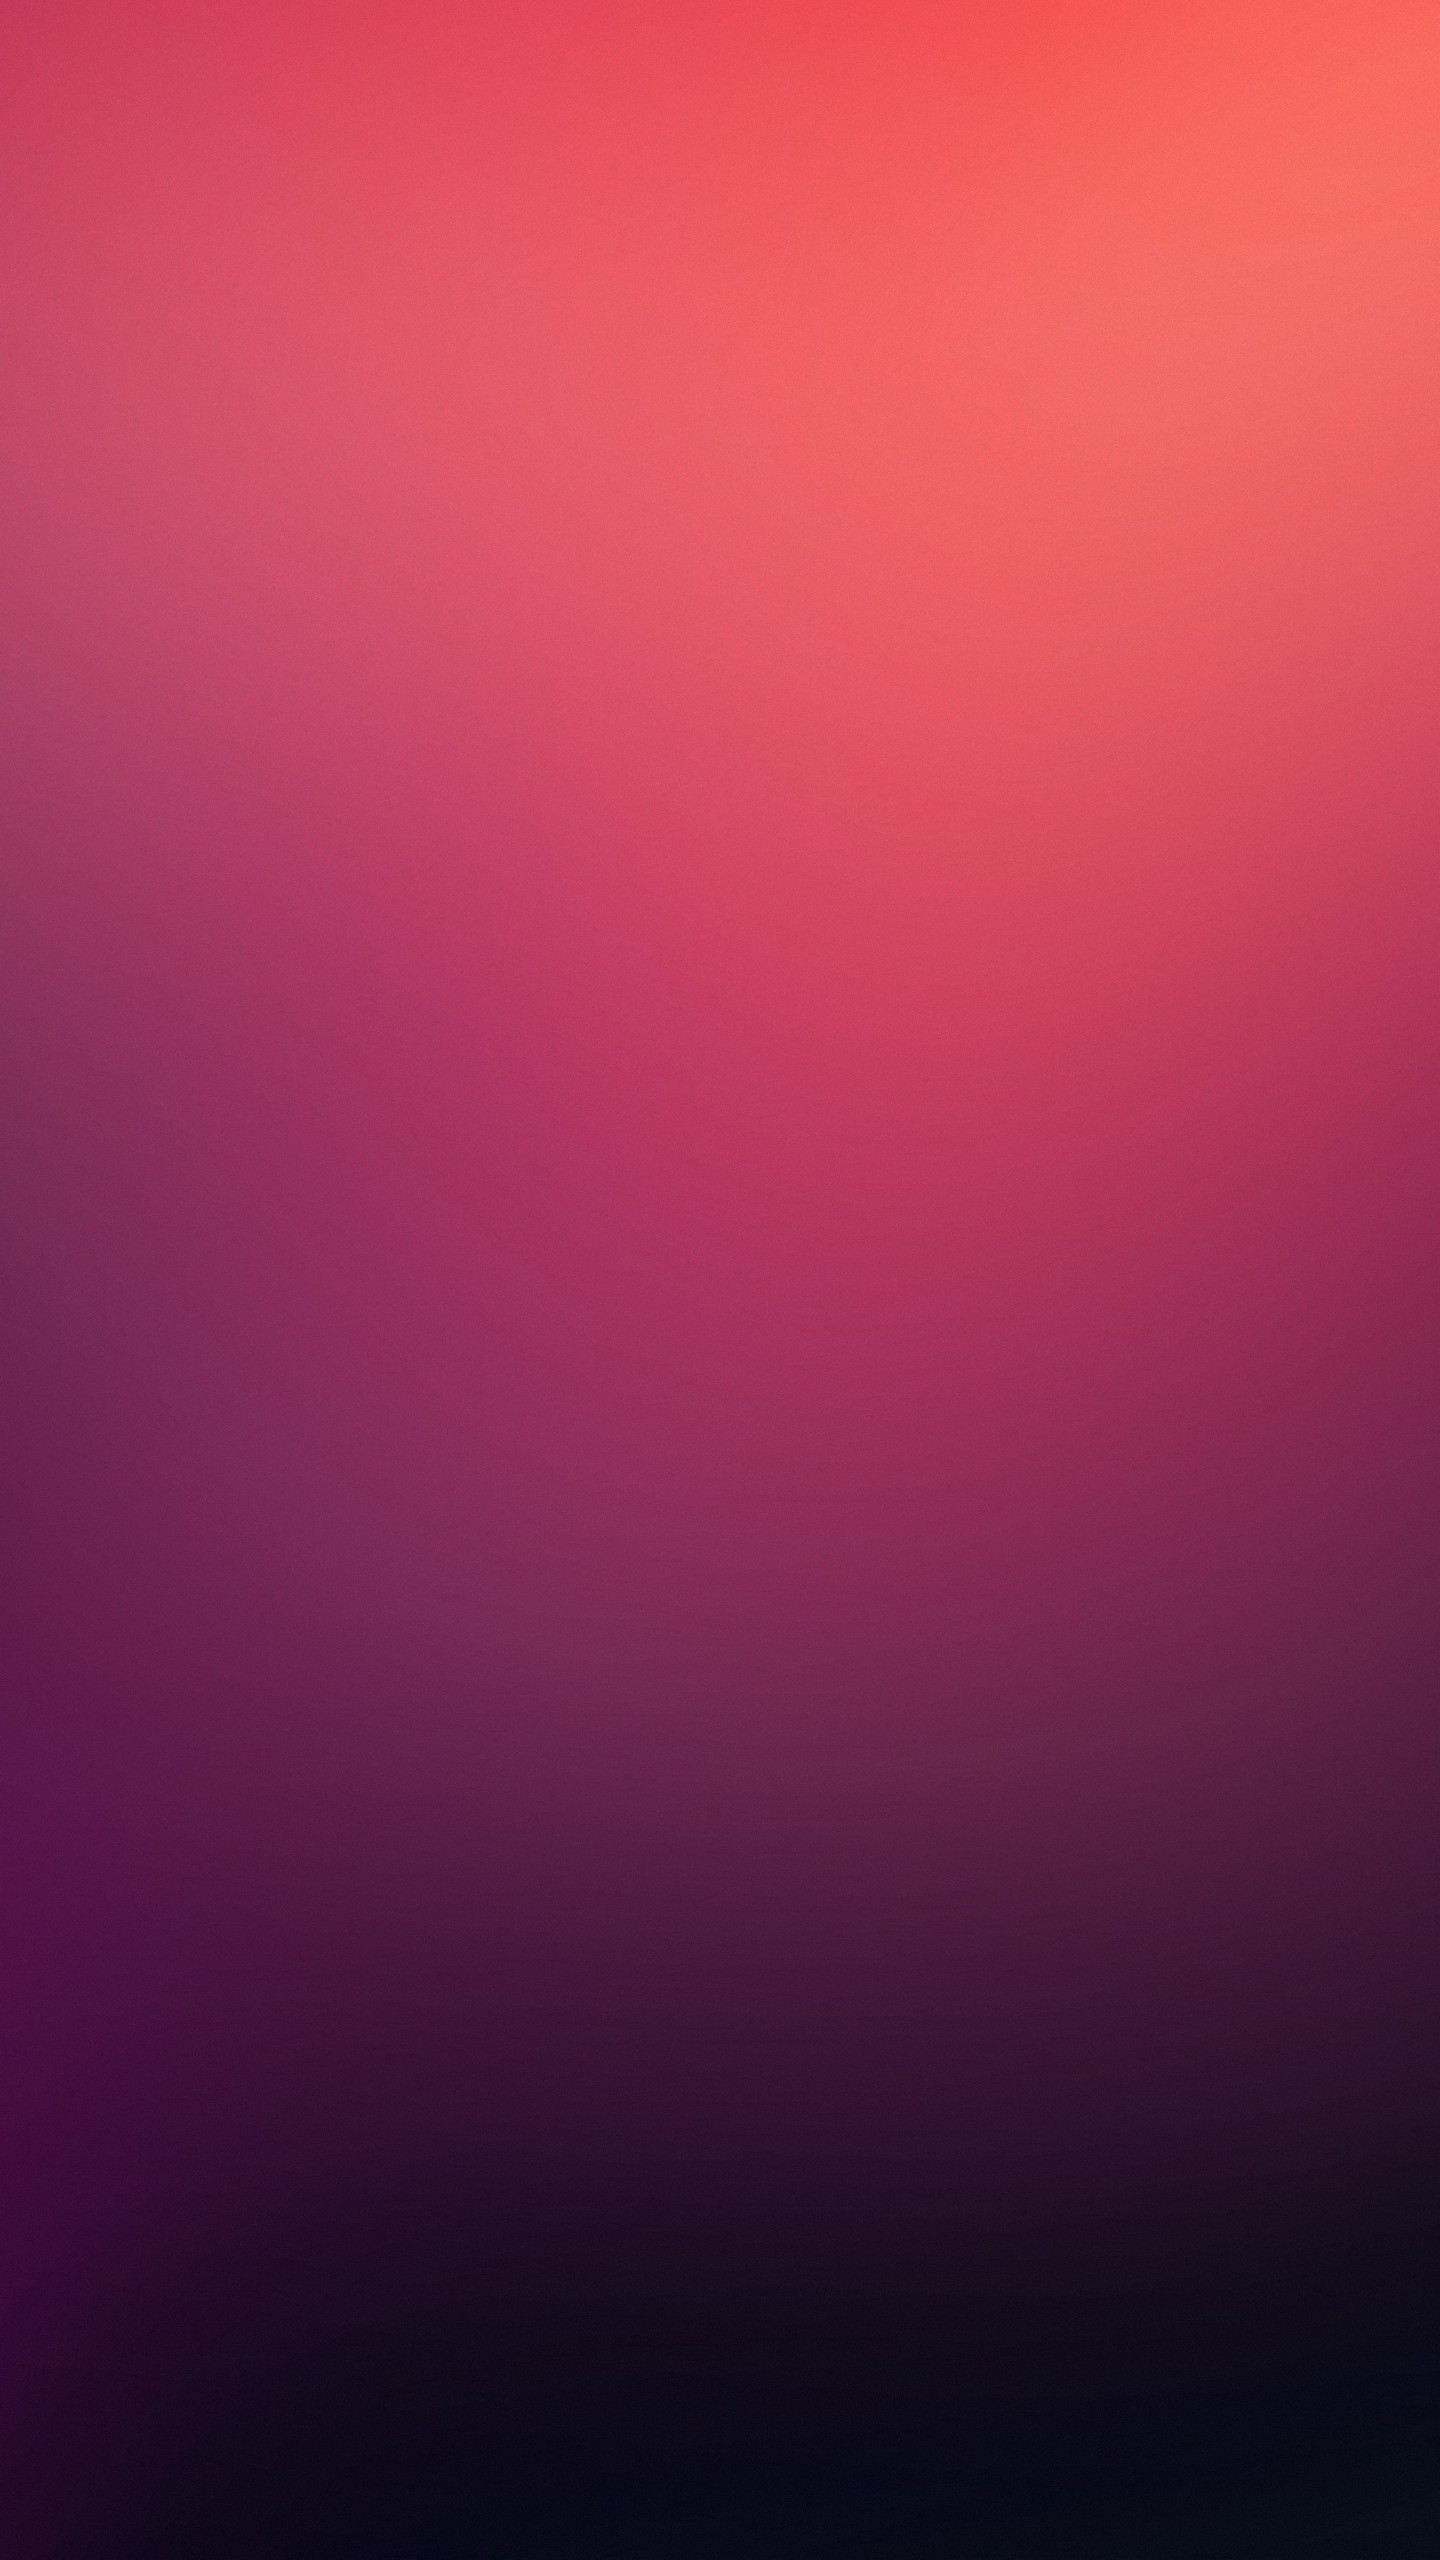 1440x2560, Hd Blemishes Dark Sony Xperia Z4 Wallpapers - Ombre Iphone Background - HD Wallpaper 